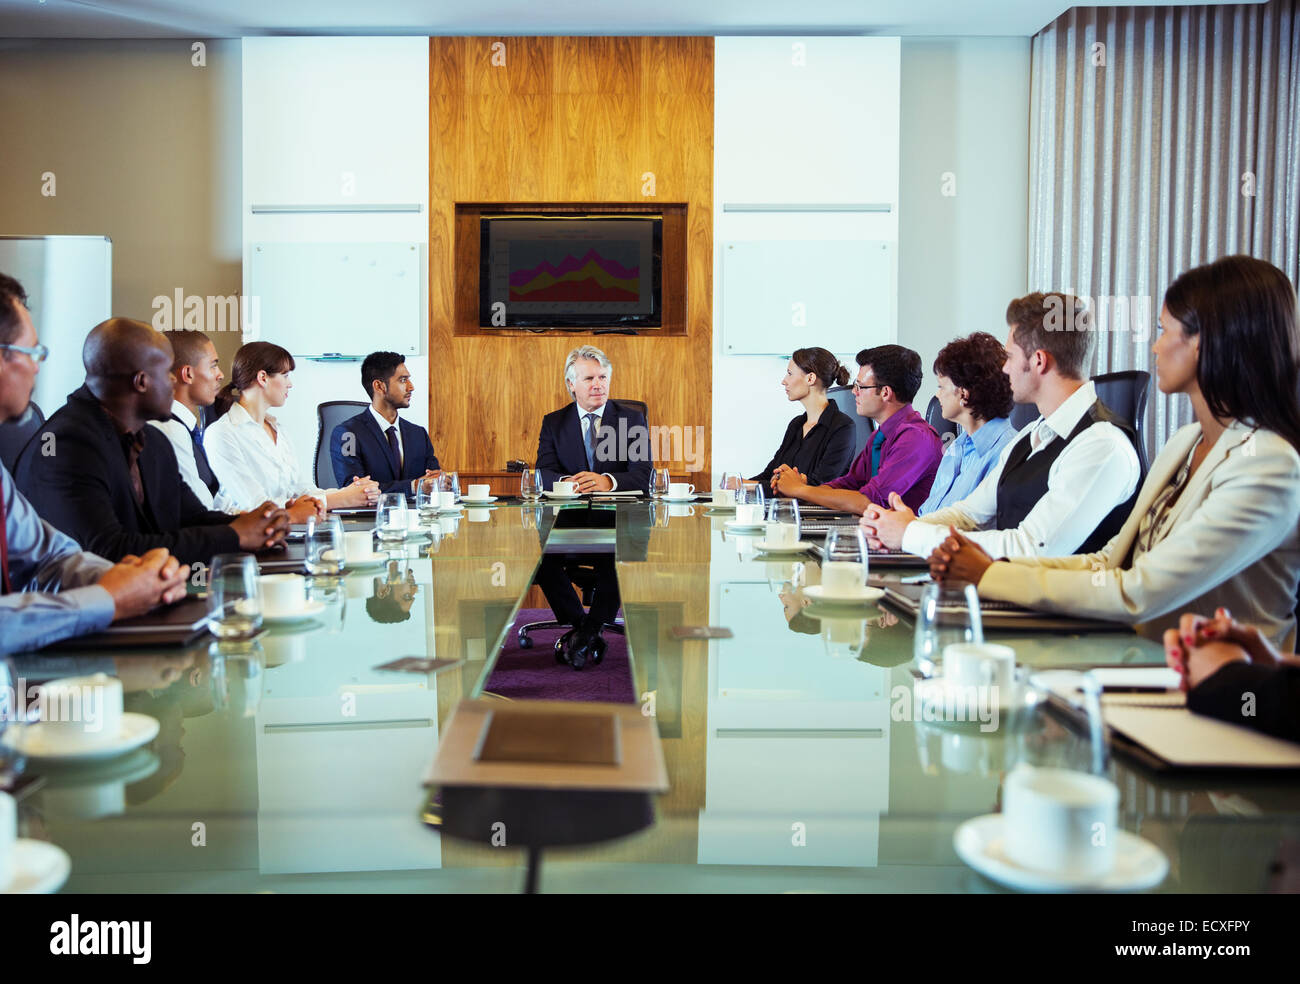 Conference participants looking at man sitting at head of conference table Stock Photo